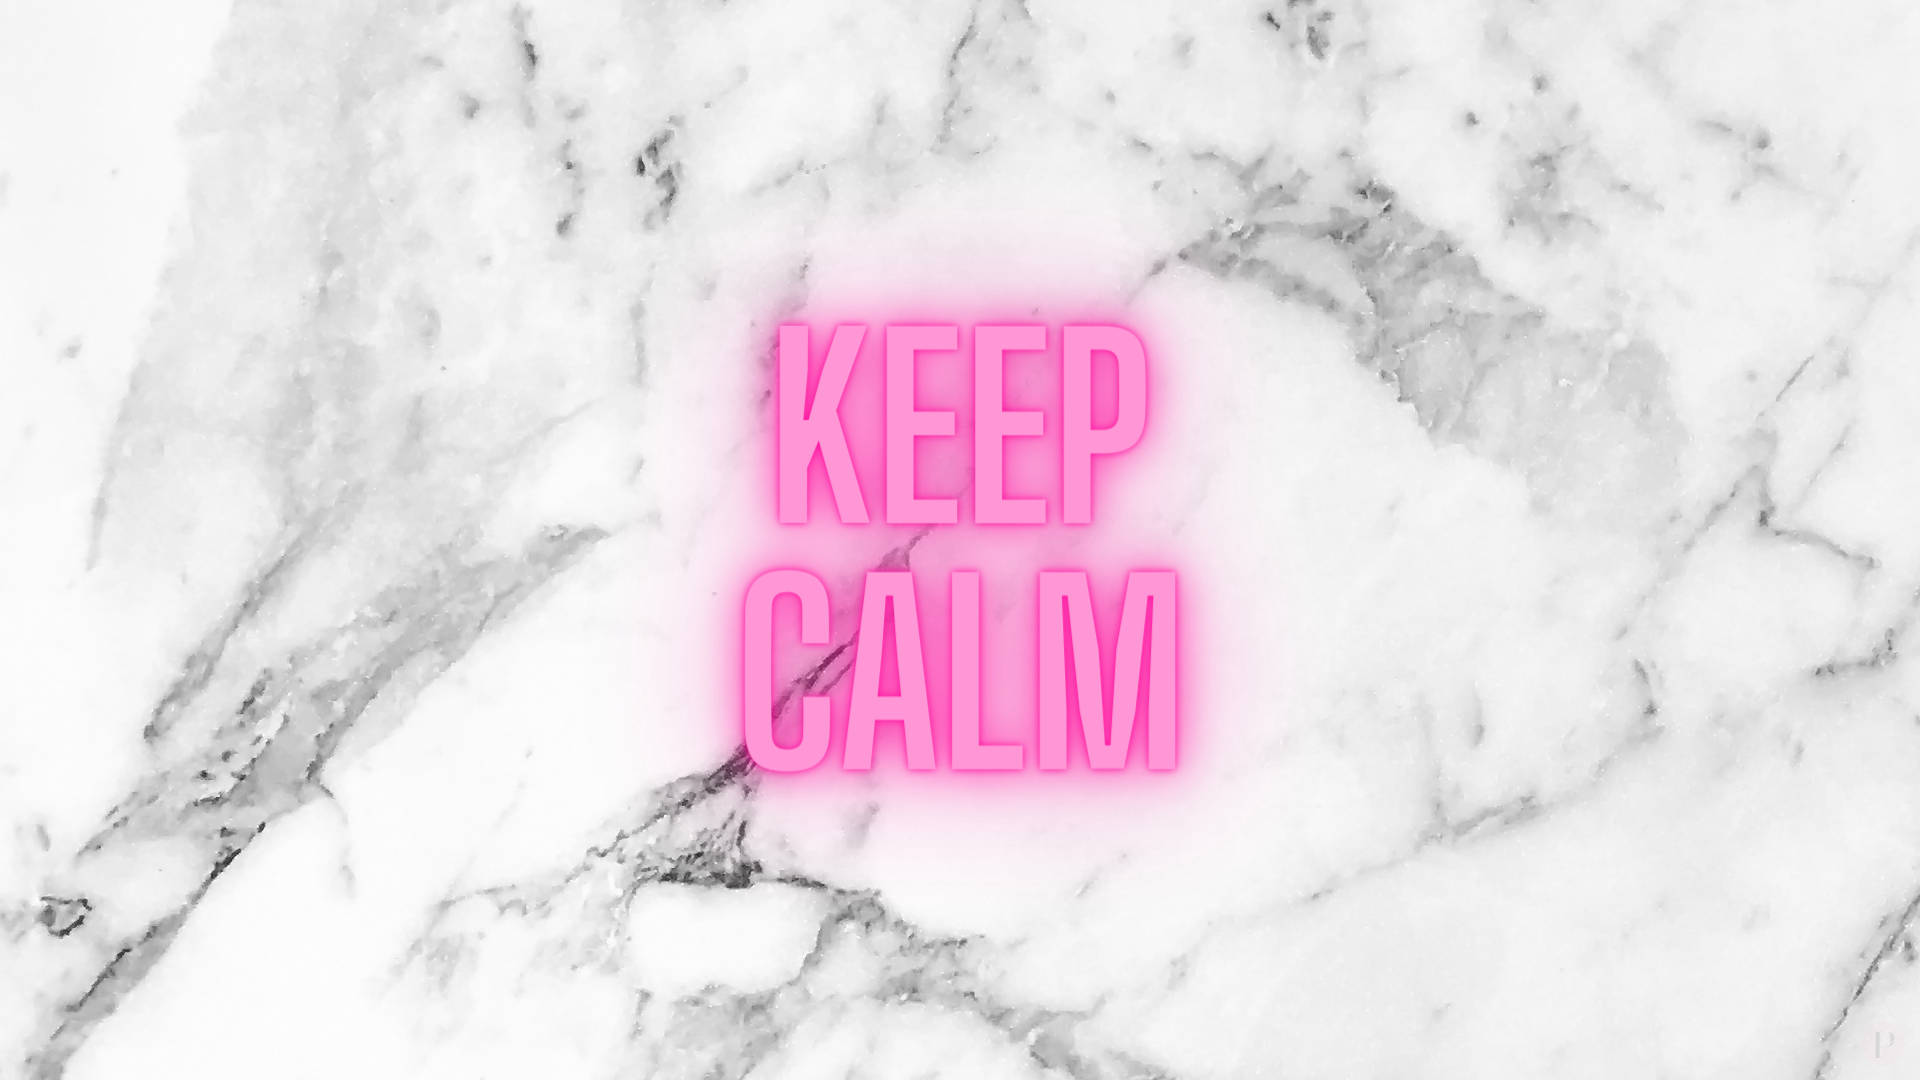 Keep Calm On White Marble Background